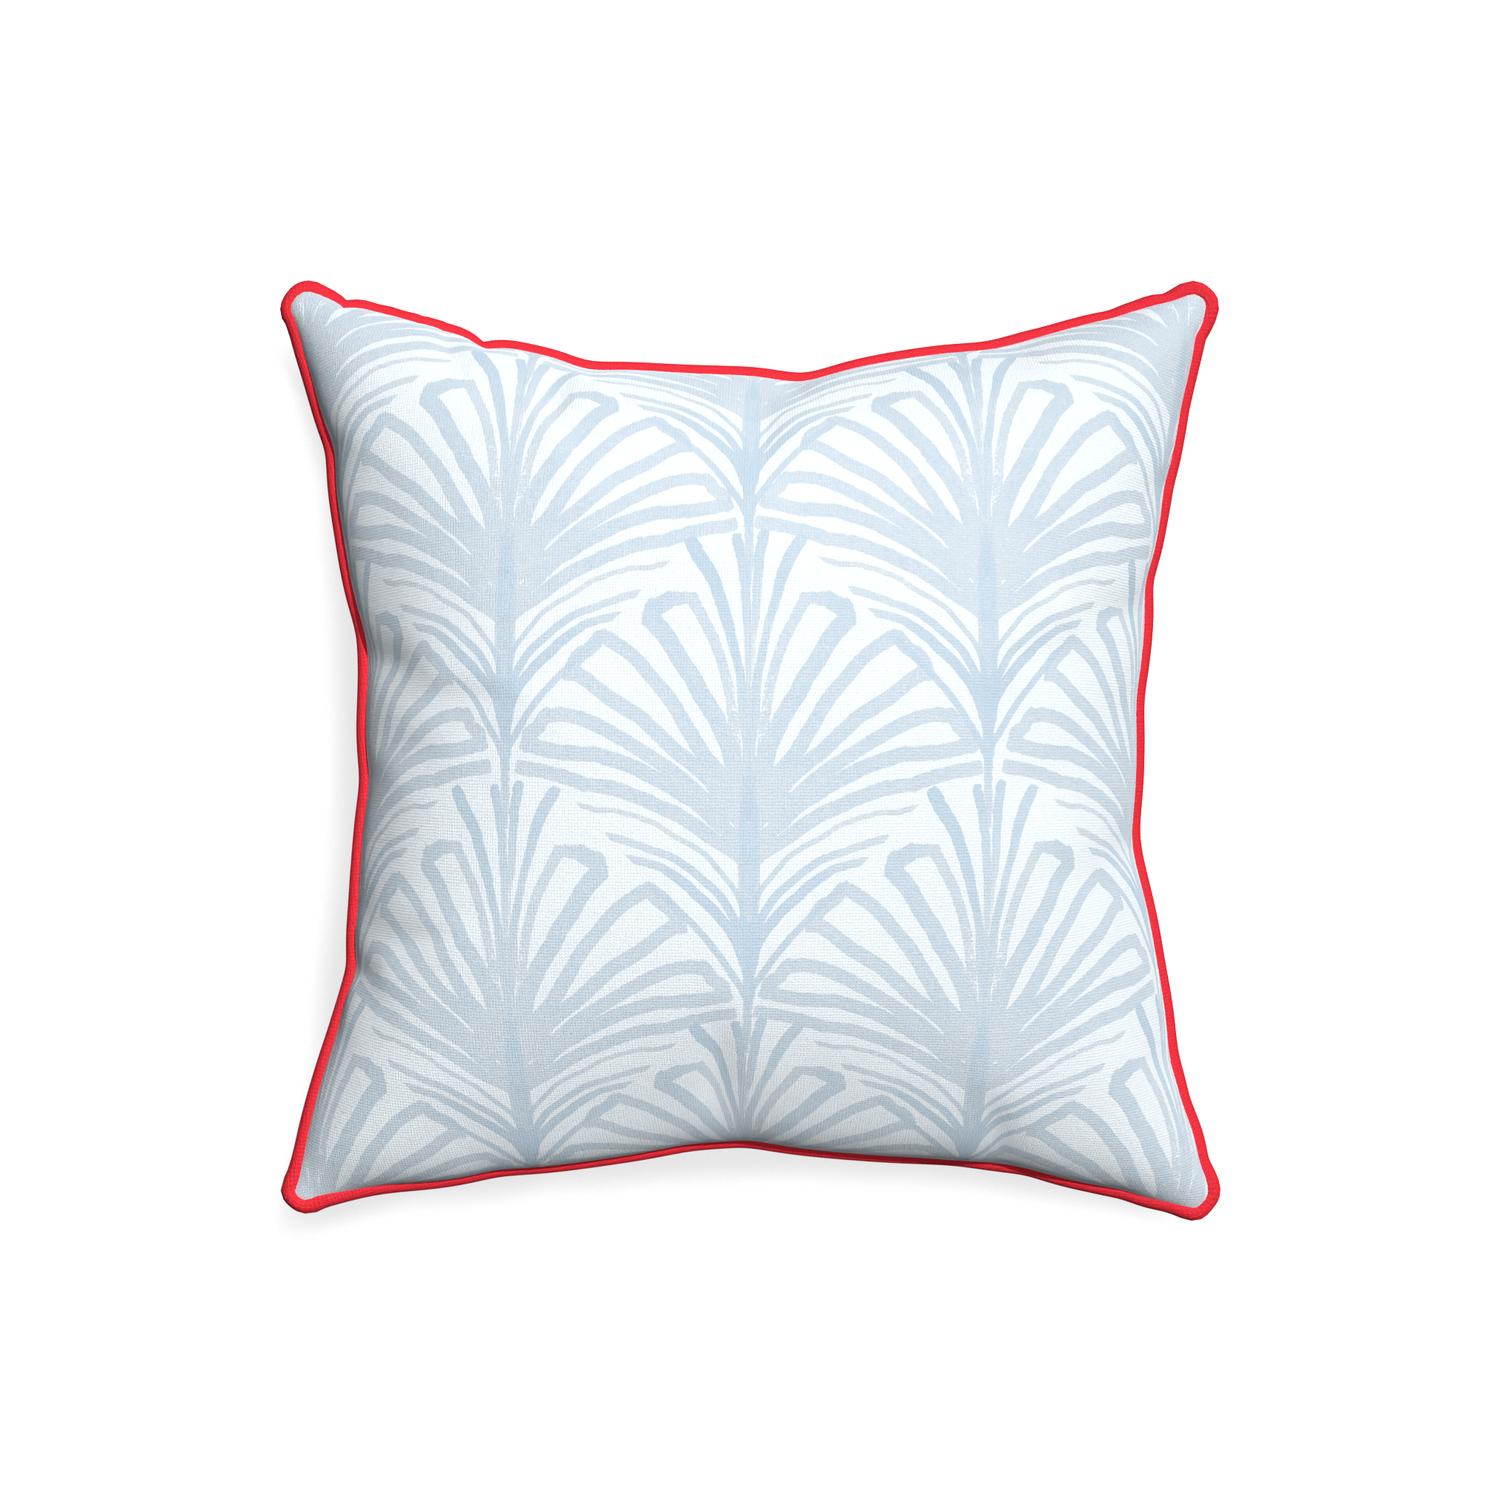 20-square suzy sky custom pillow with cherry piping on white background